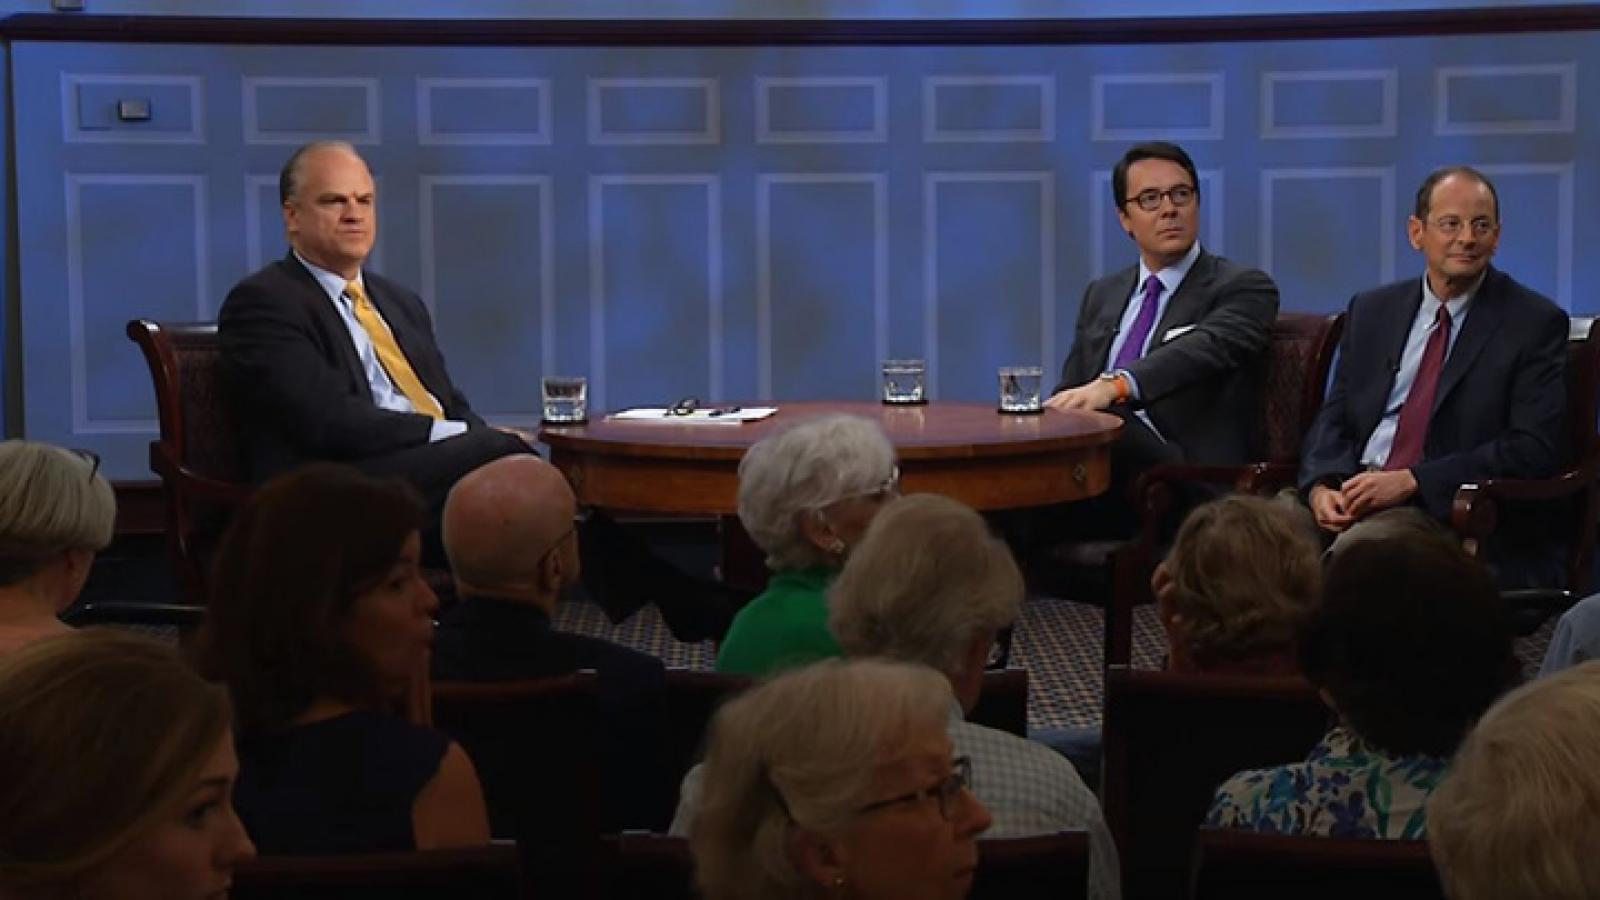 Jonathan Rauch and Ryan Lizza take questions on American contemporary politics from the American Forum studio audience